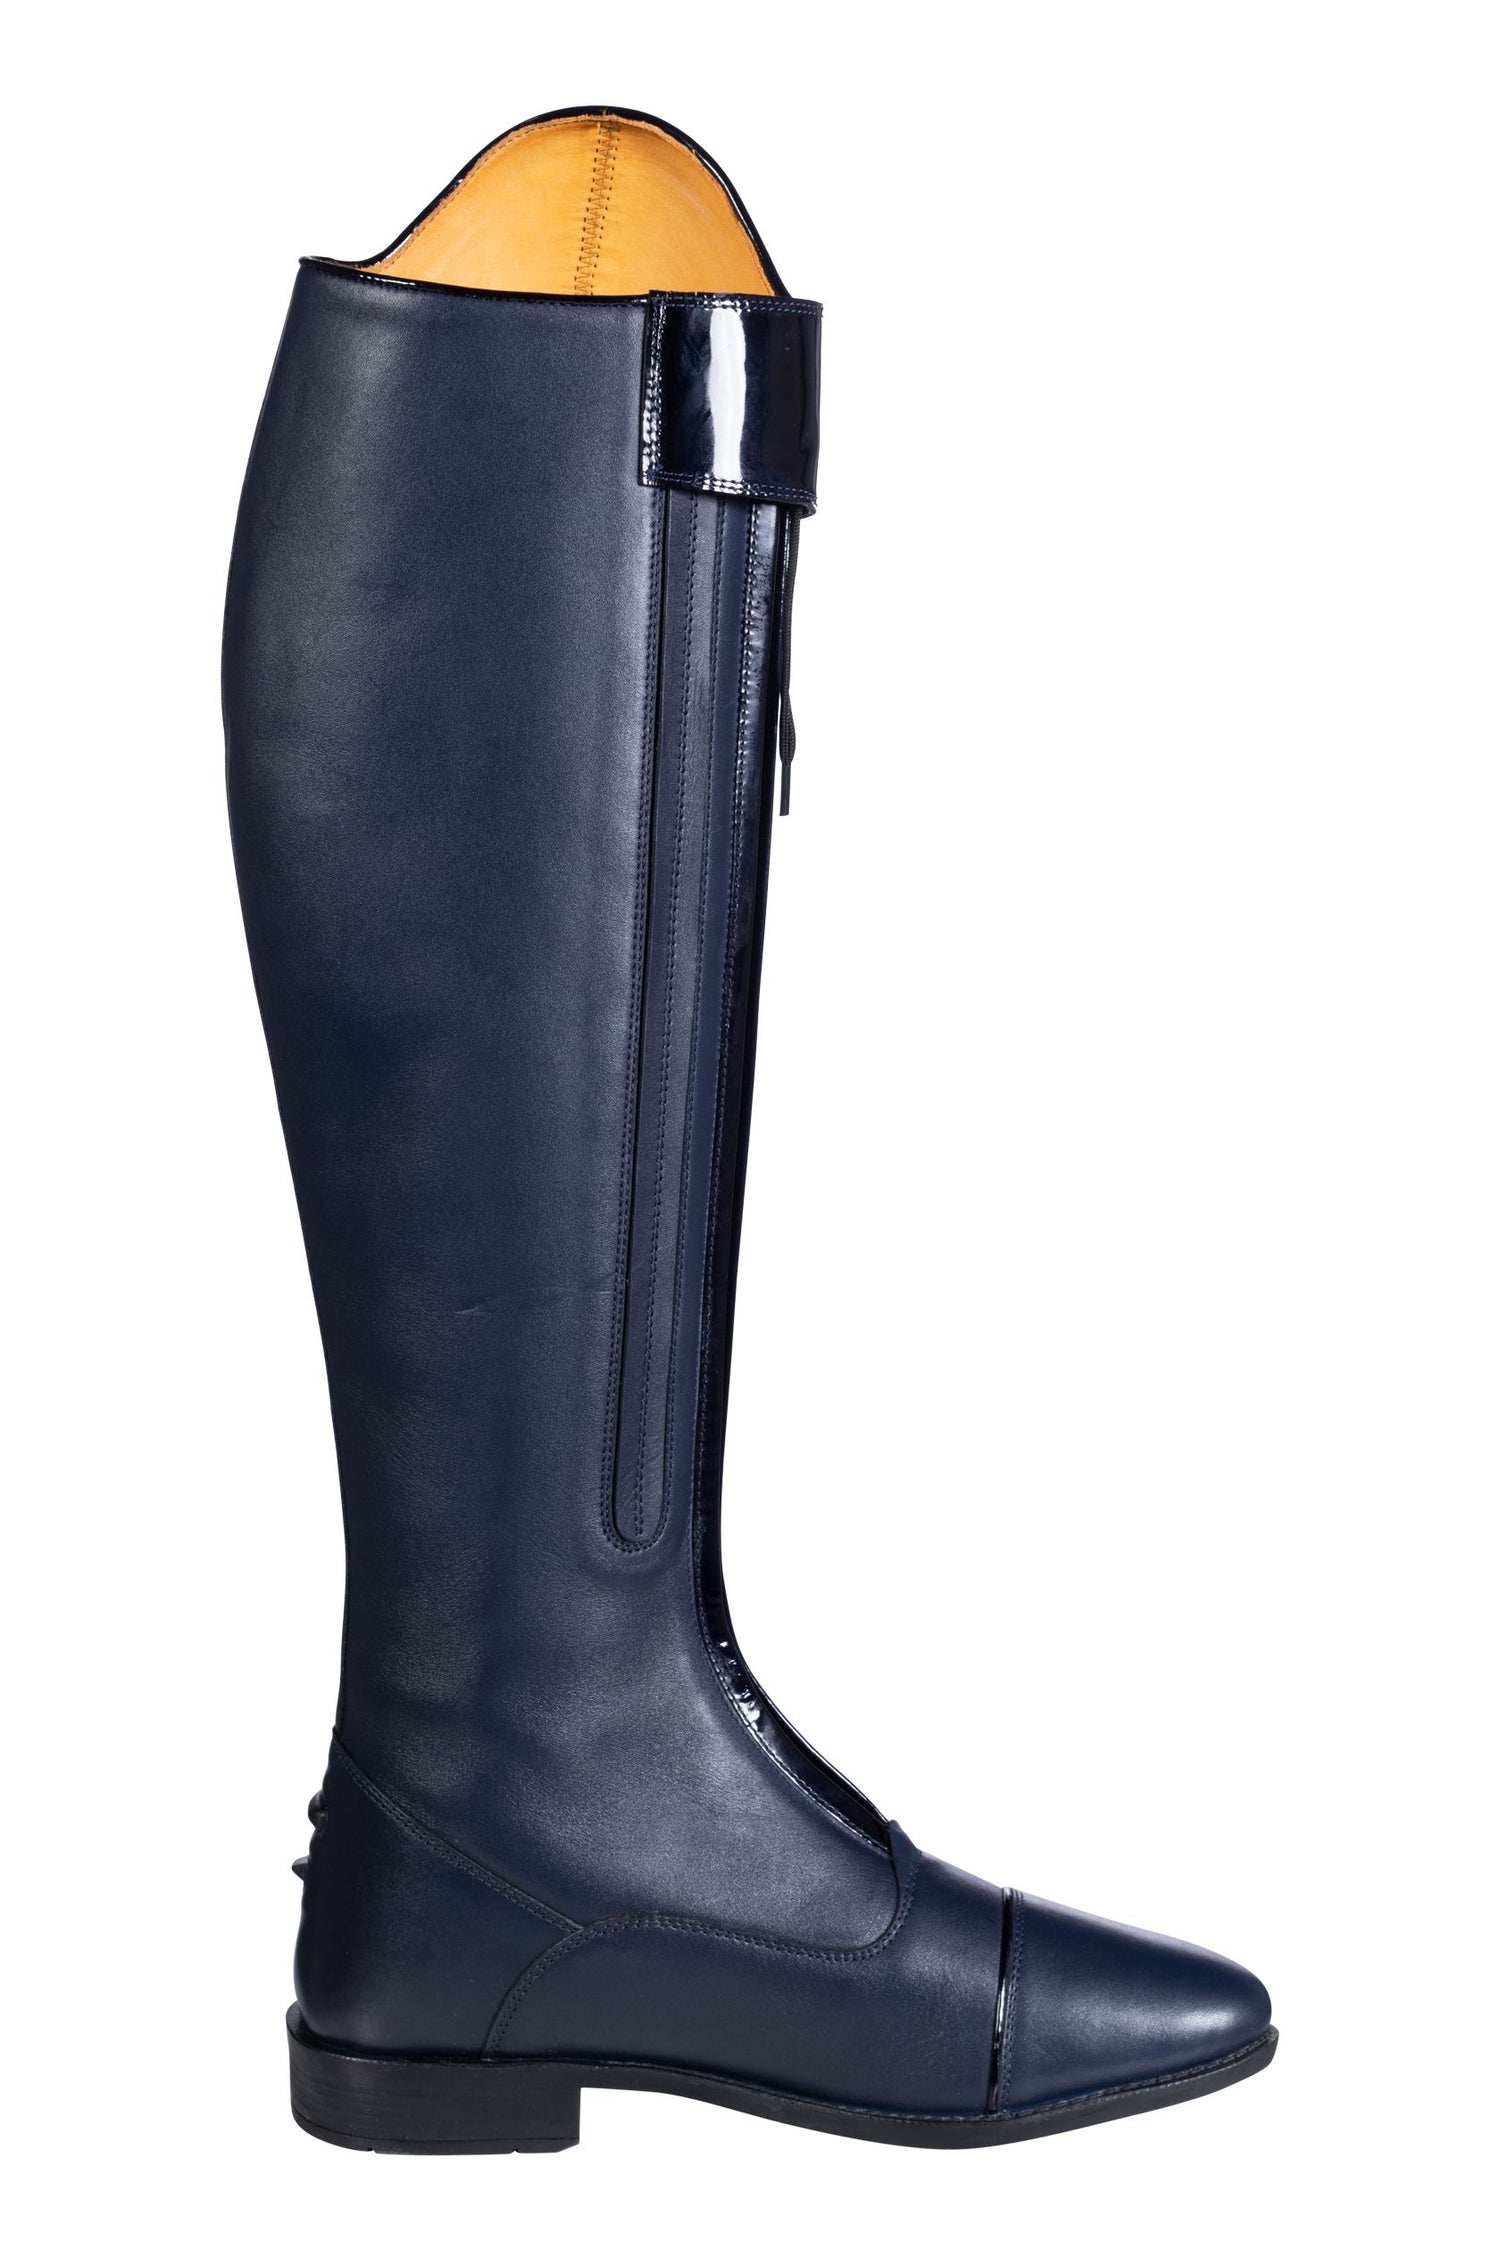 HKM riding boots